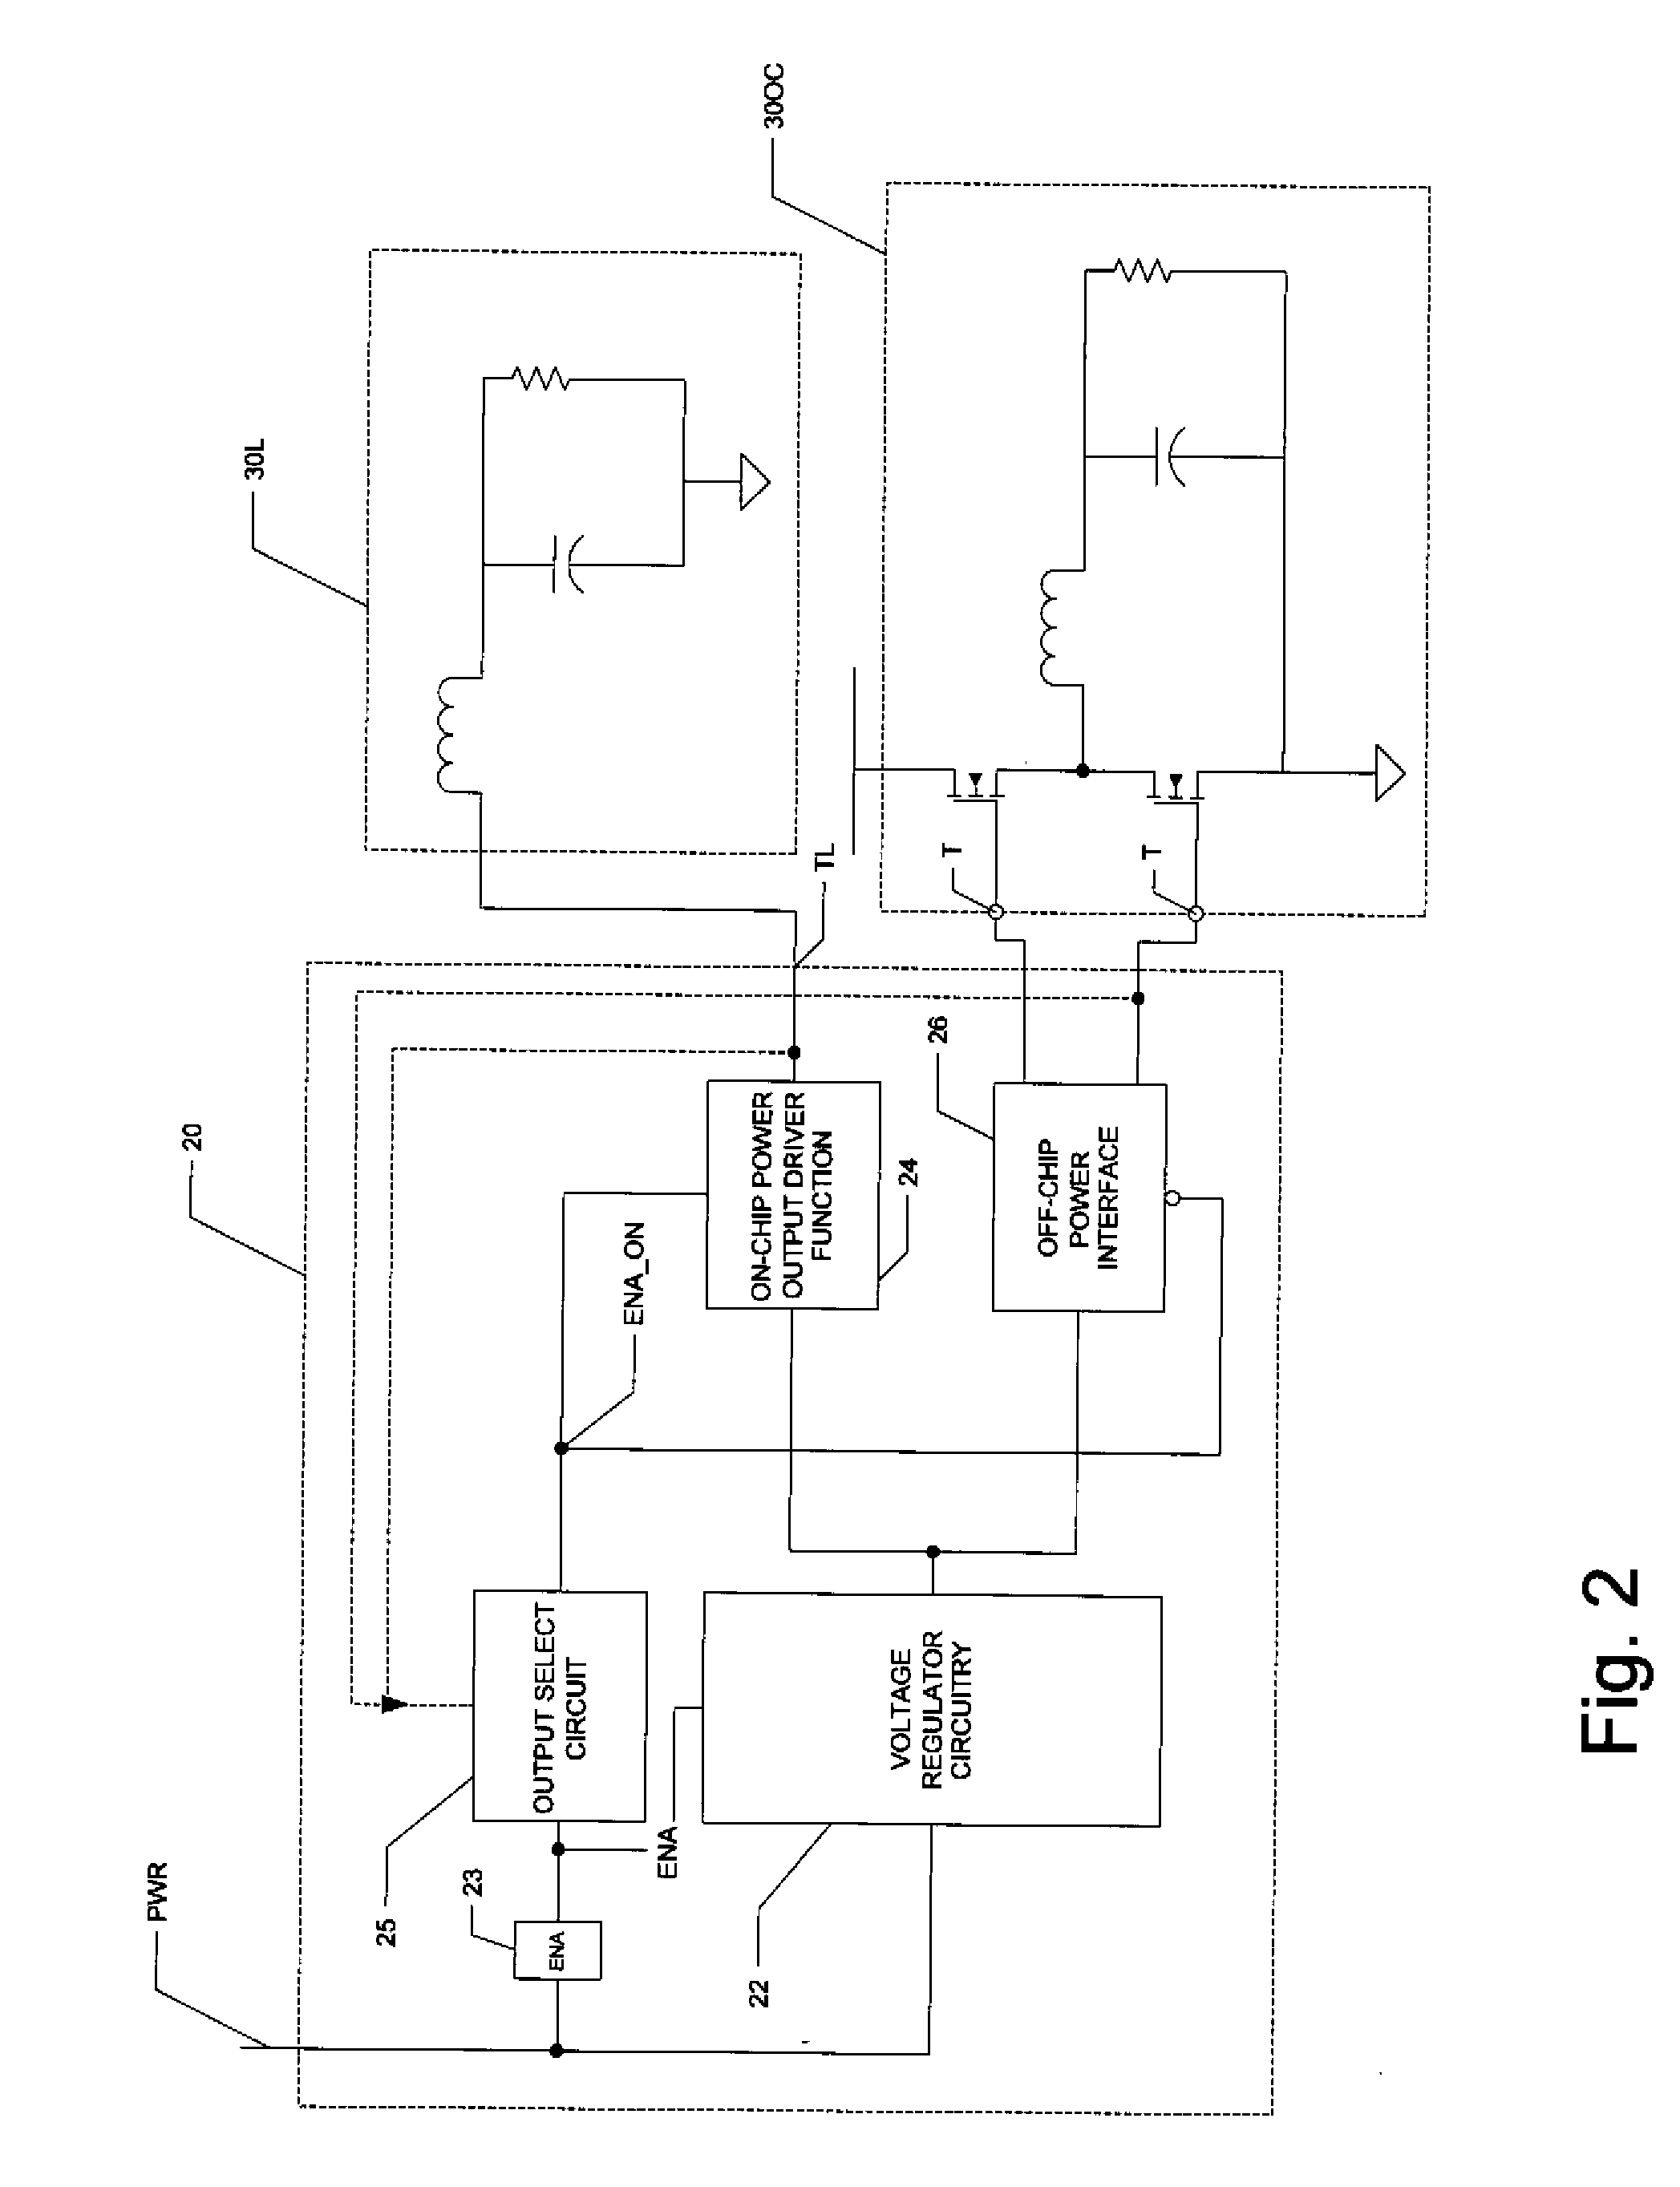 Regulator with Automatic Power Output Device Detection